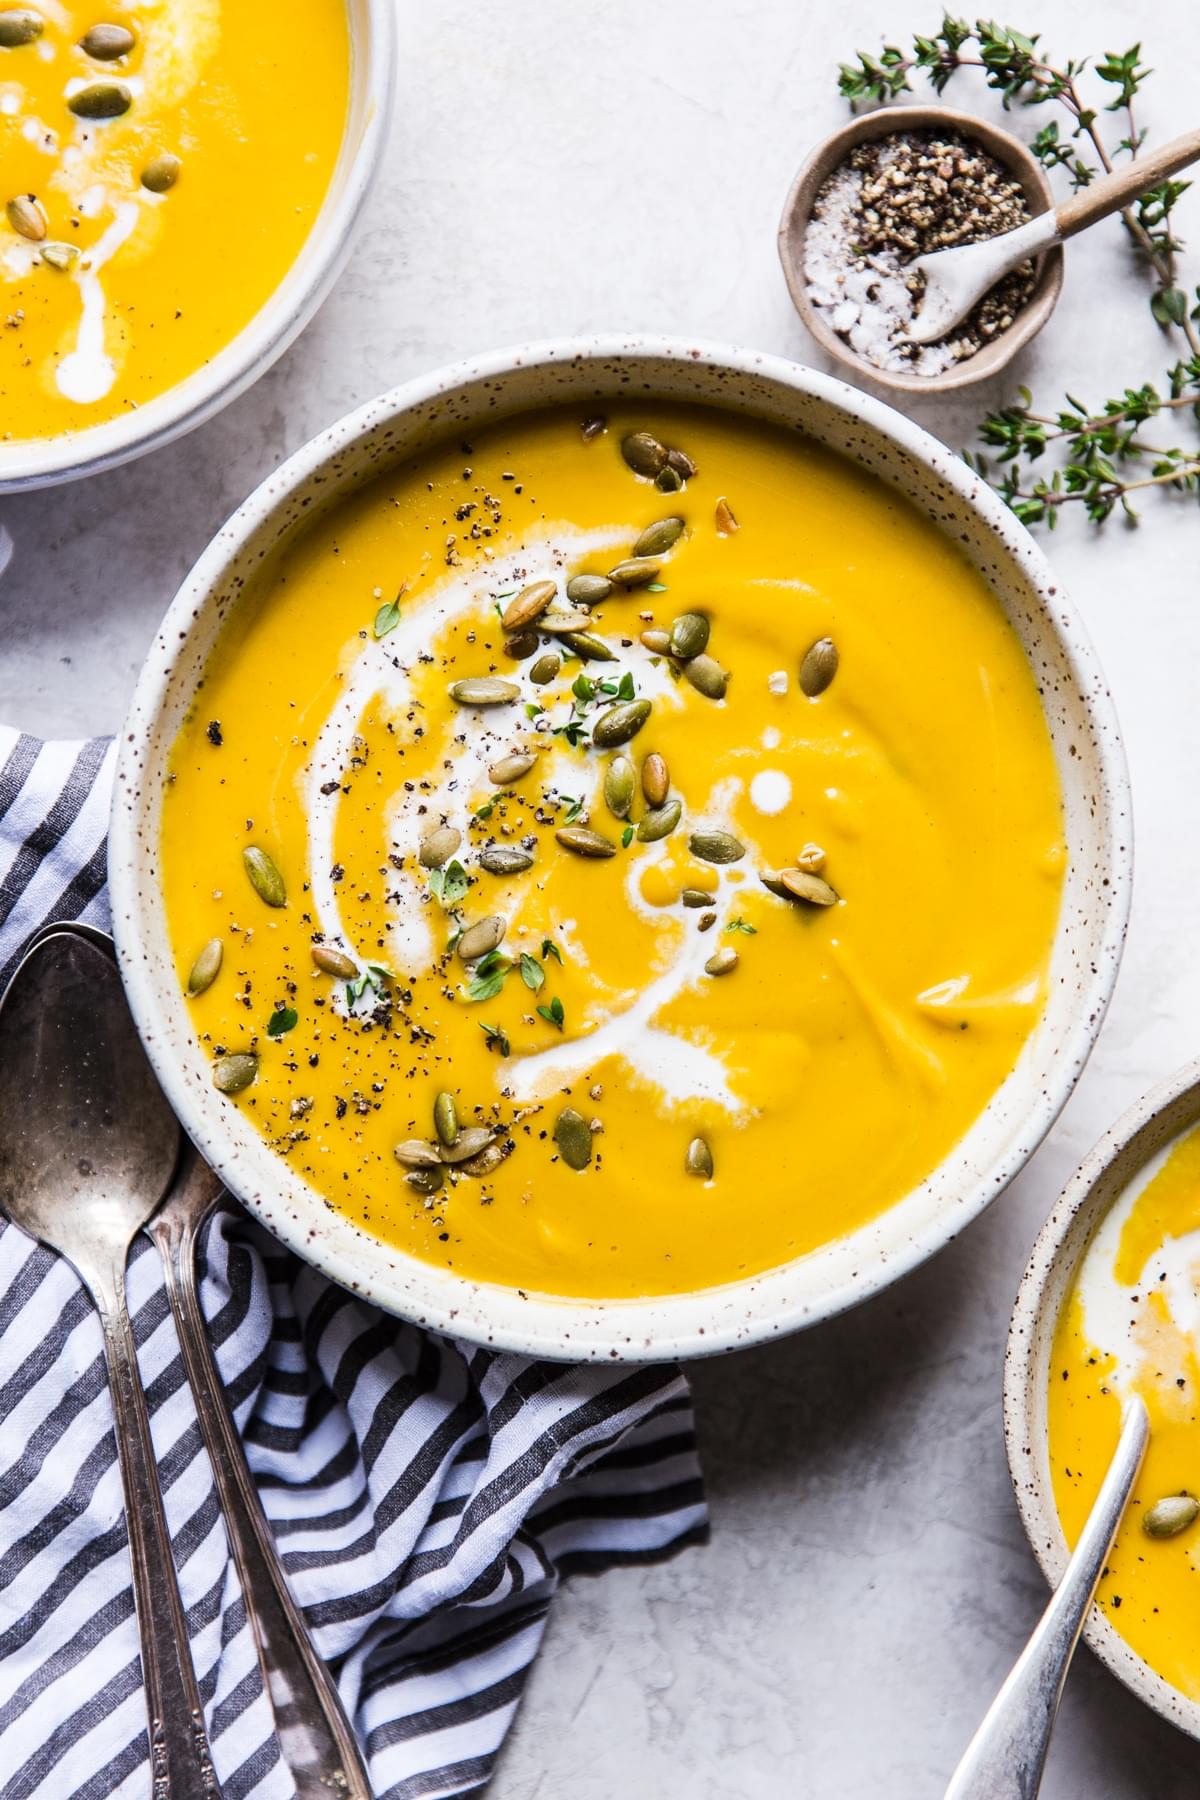 Roasted Butternut Squash Soup With Apples in 3 bowls with a striped linen and a spoon